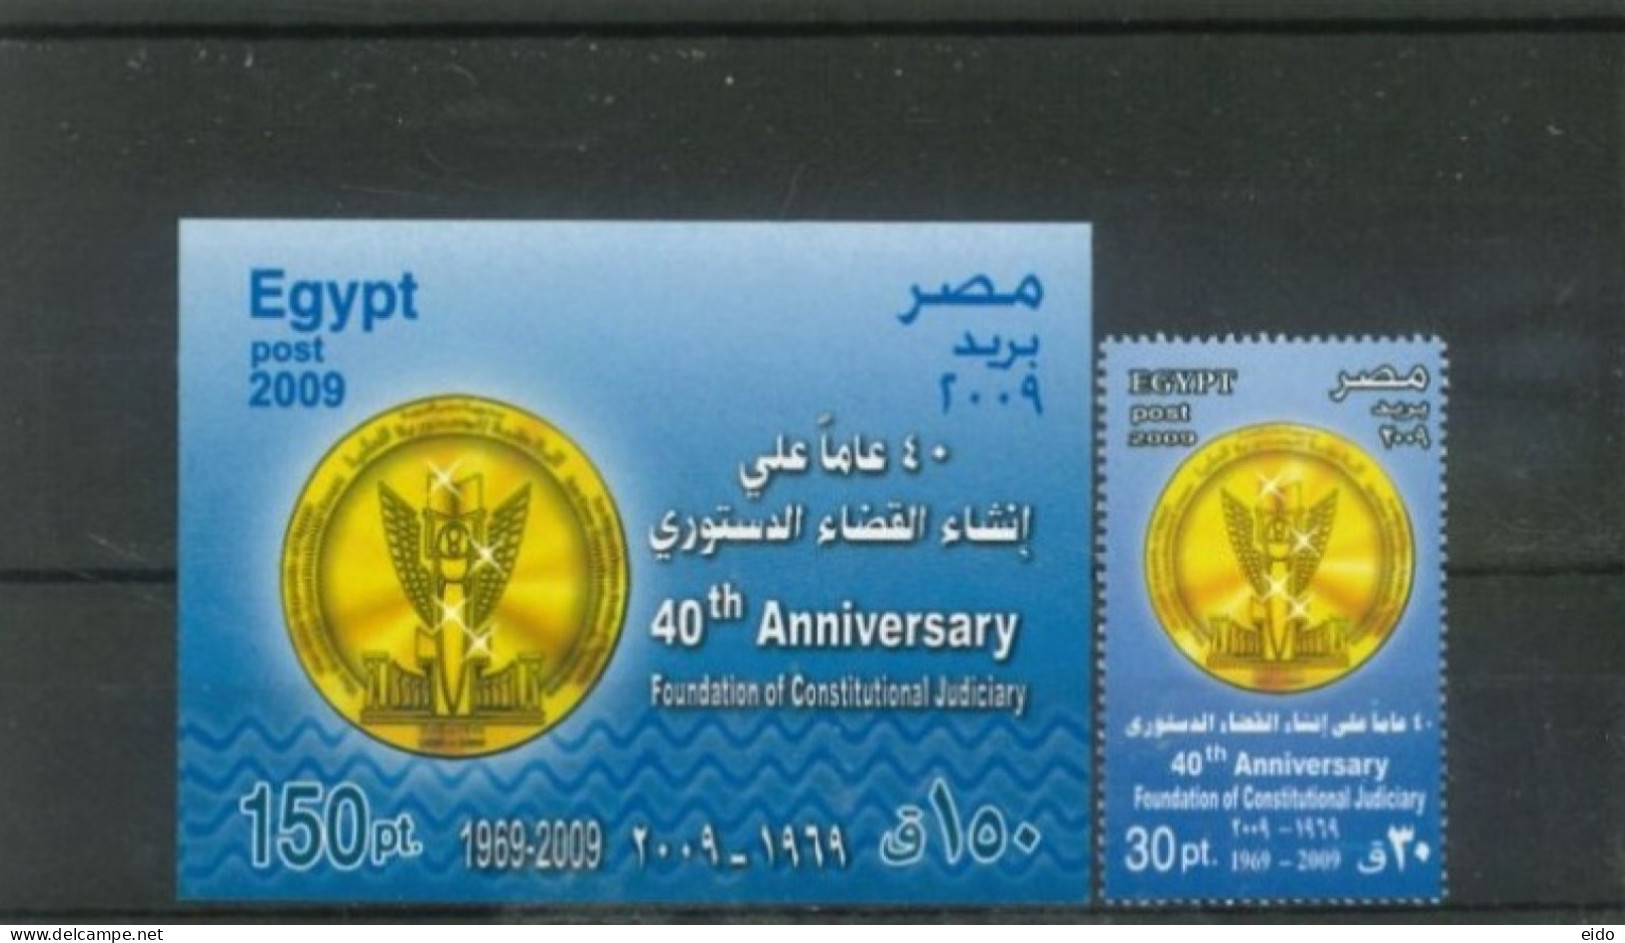 EGYPT - 2009, 40th ANNIVERSARY FOUNDATION OF CONSTITUTIONAL JUDICIARY MINIATURE STAMP SHEET & STAMP, UMM (**). - Covers & Documents